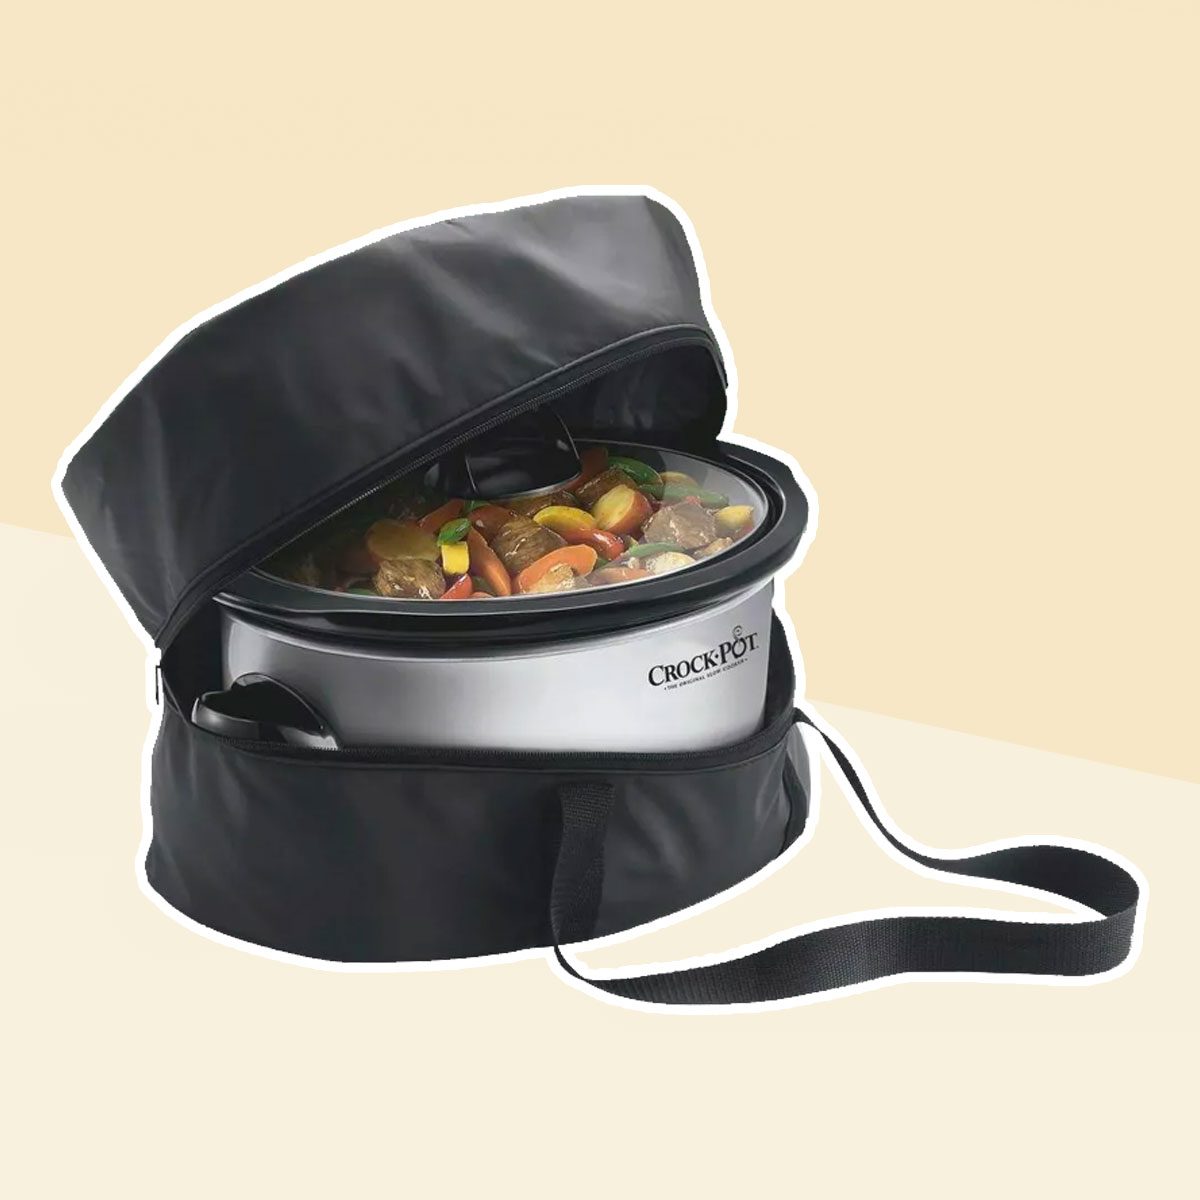 Ultimate Slow Cooker and Accessories Gift Guide for 2021 - My Slow